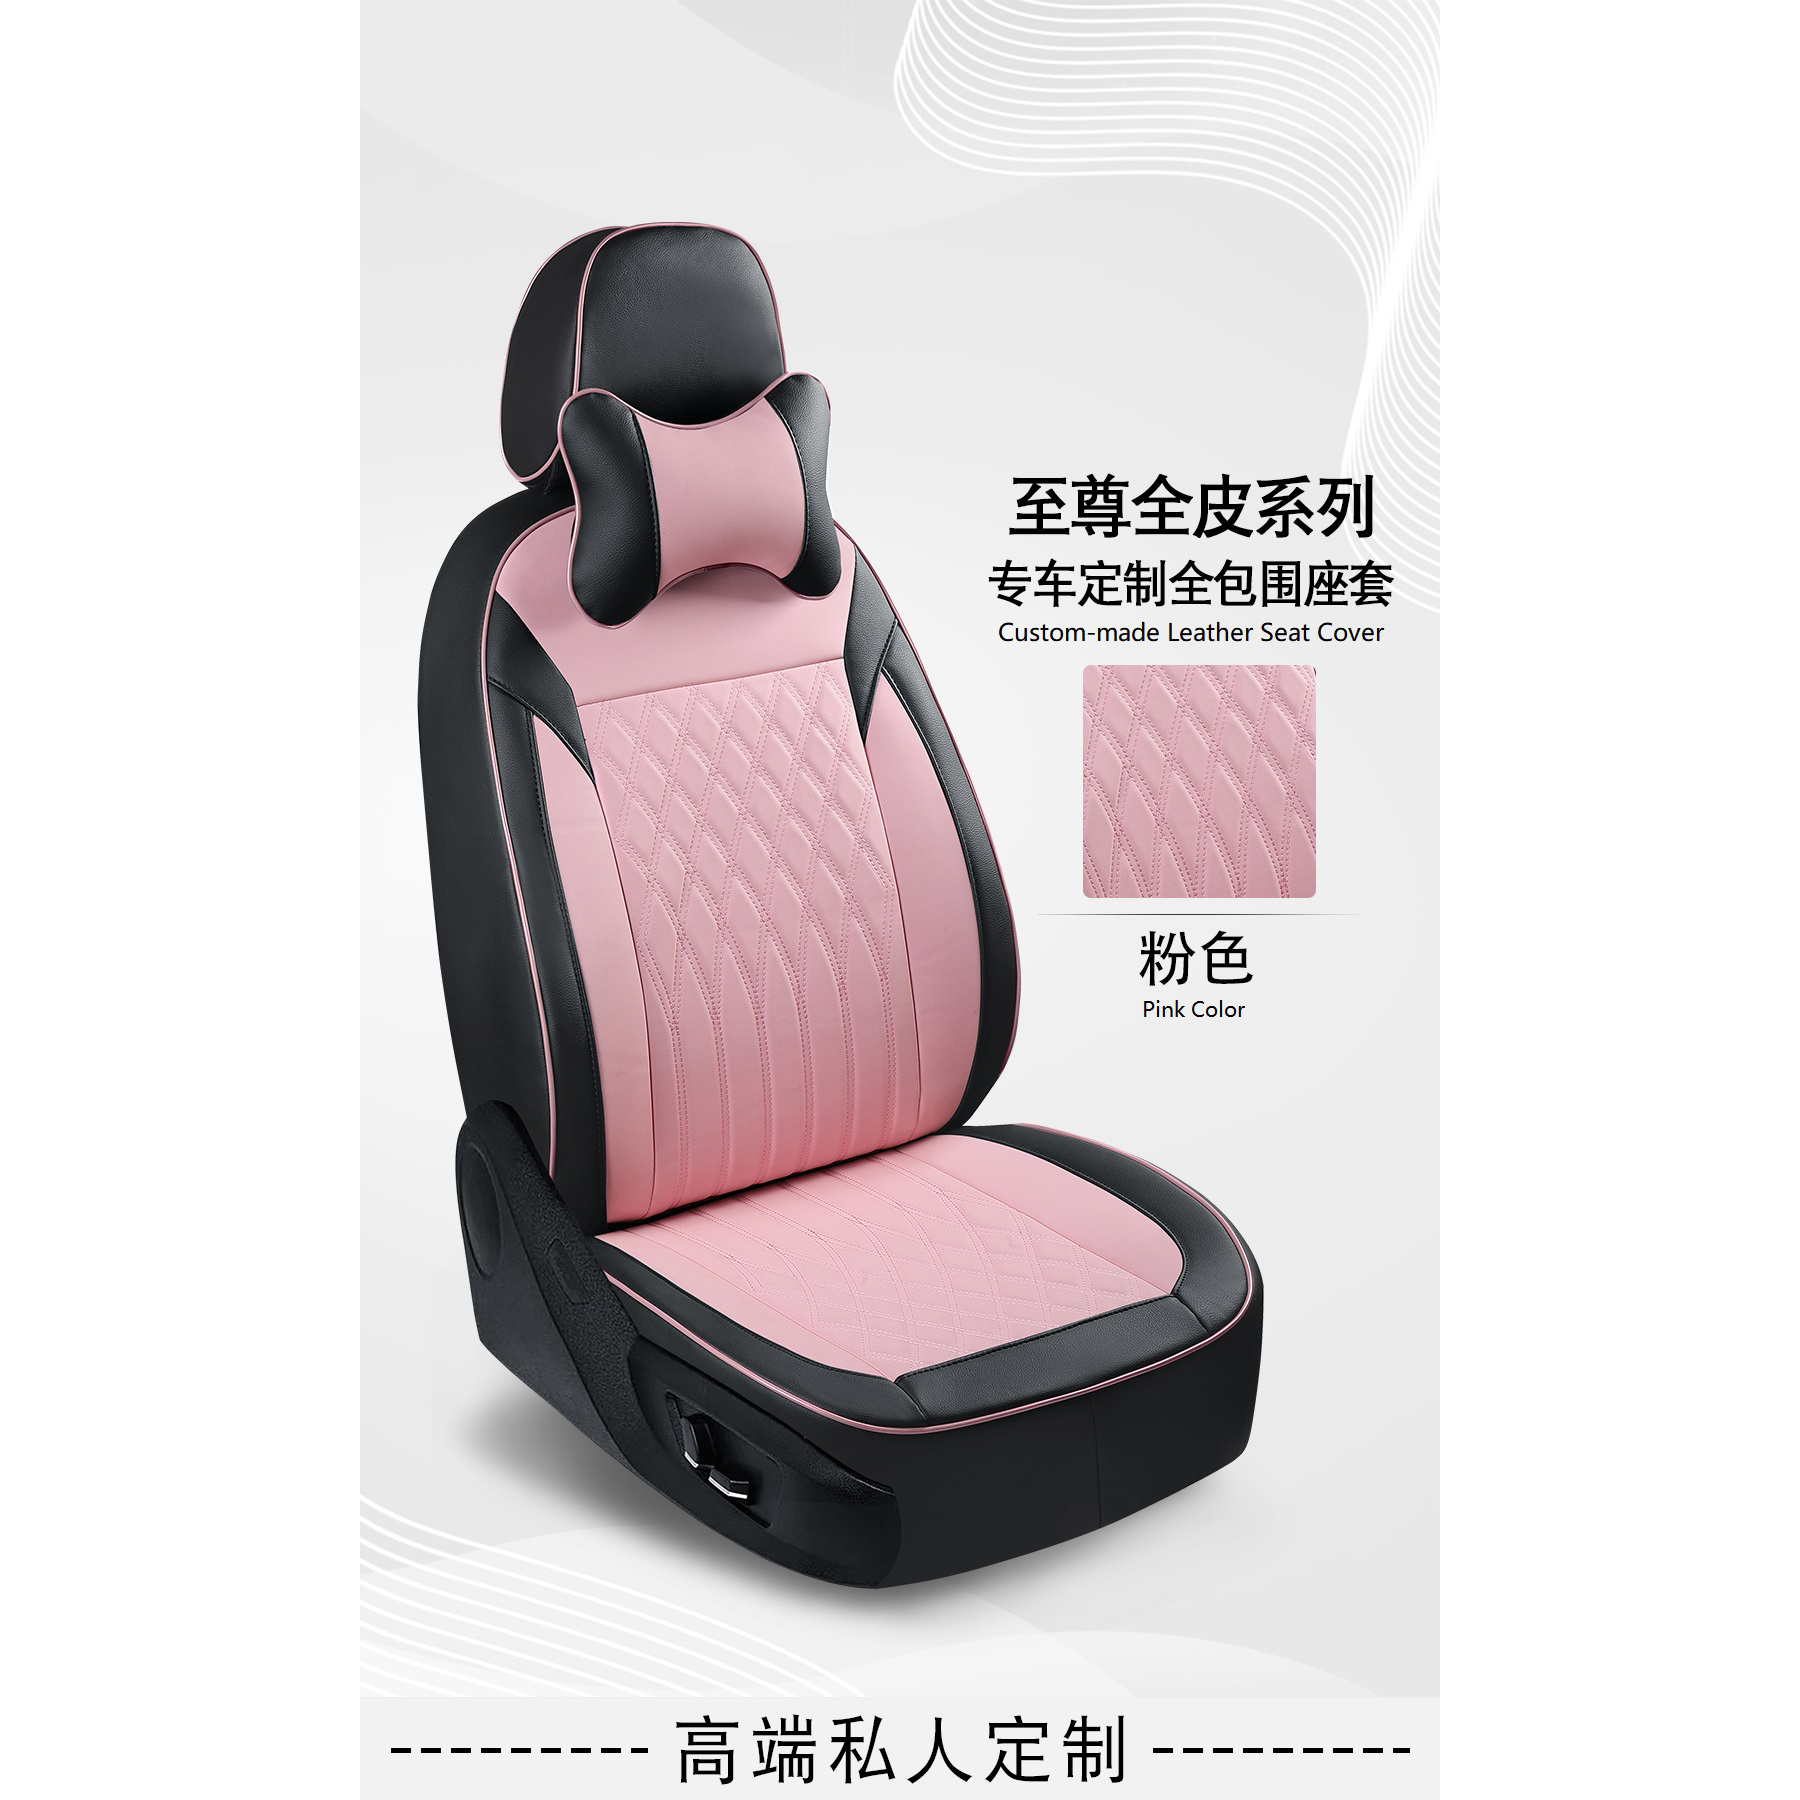 Toyota seat cover (1)